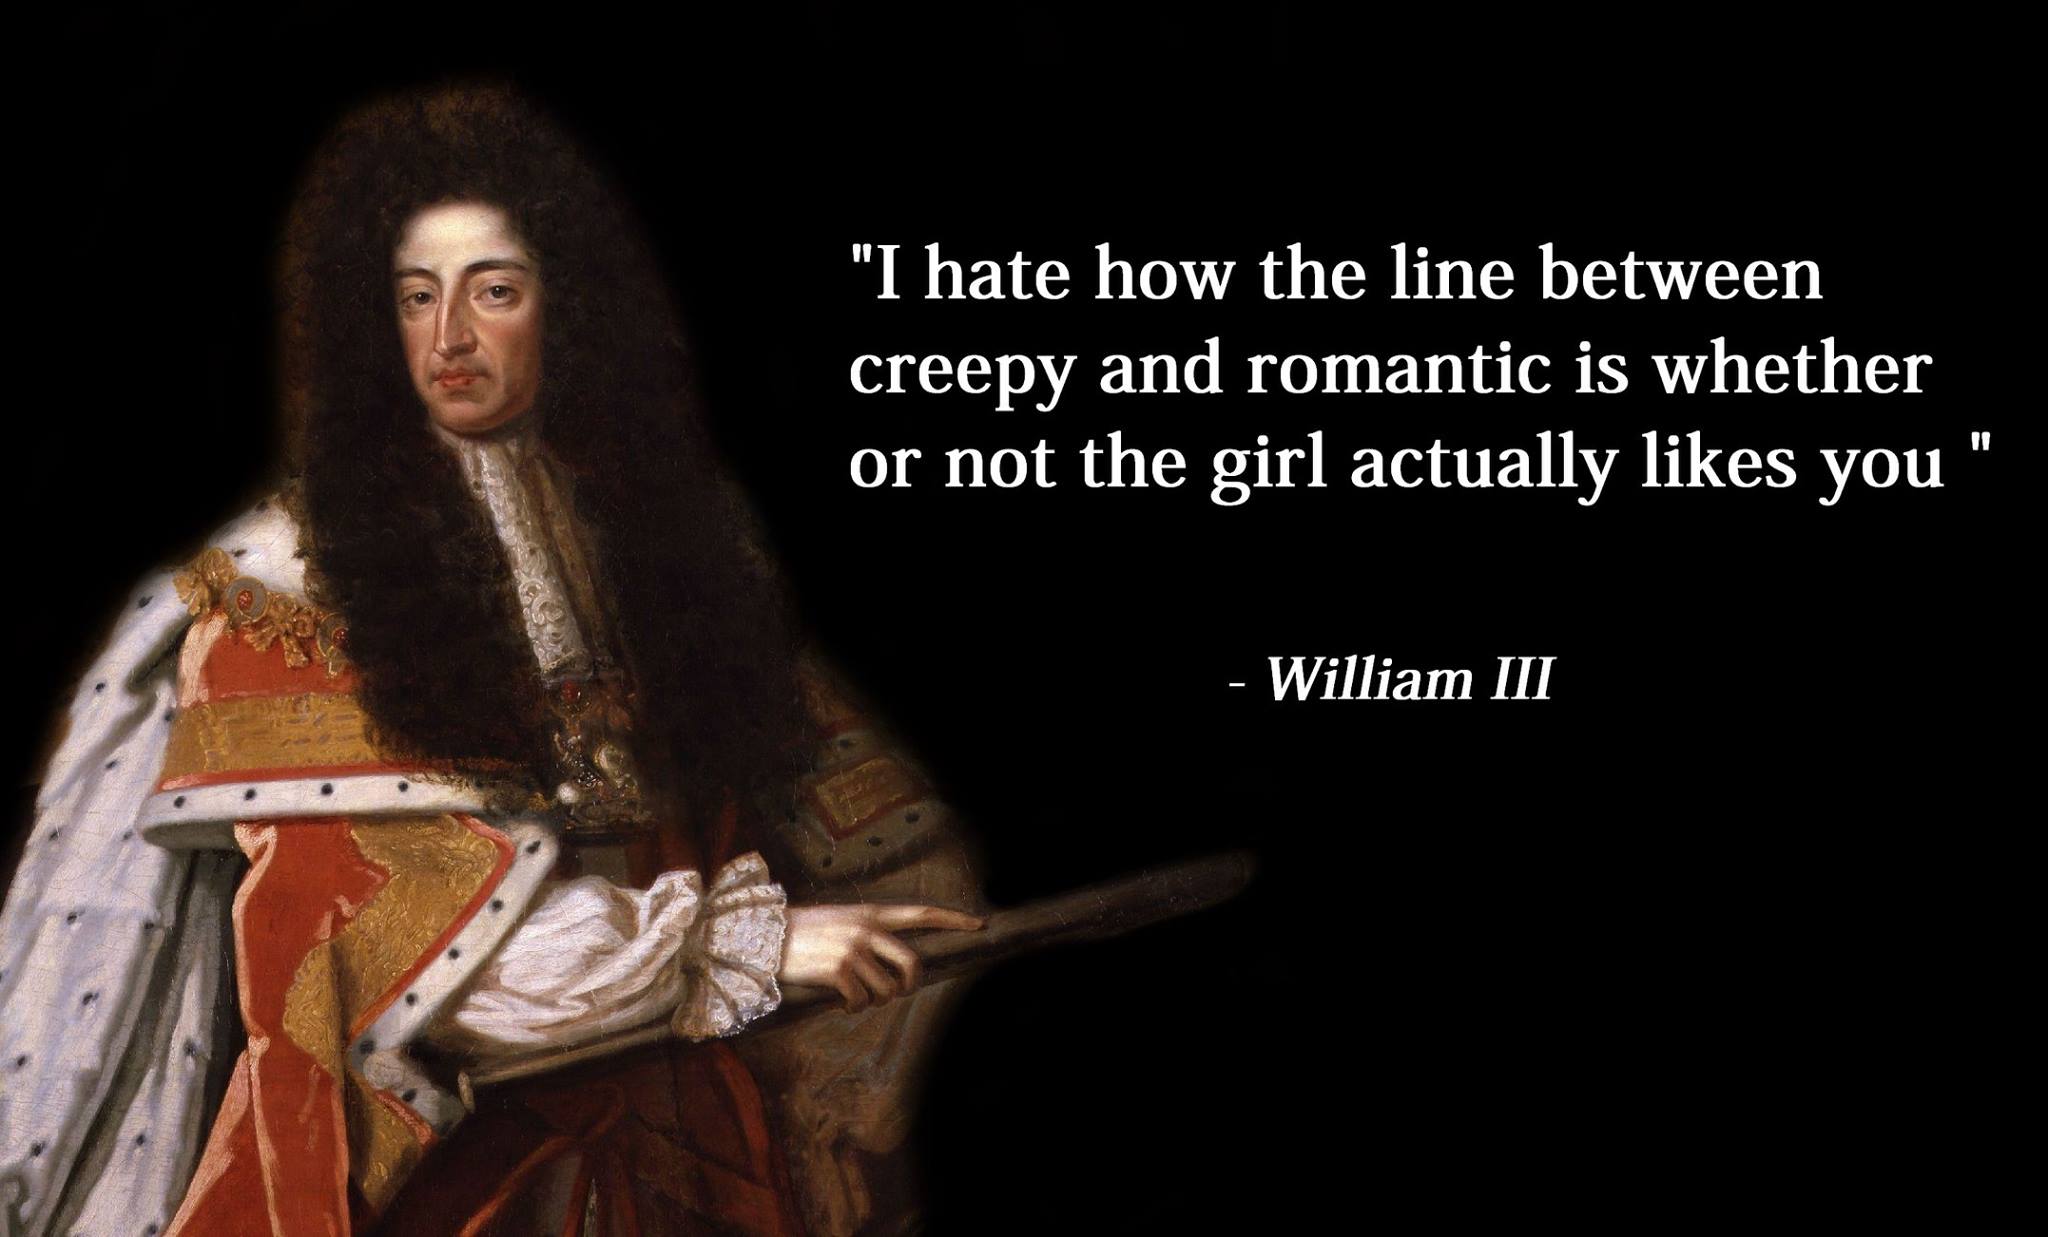 william iii thomas murray - "I hate how the line between creepy and romantic is whether or not the girl actually you" William Iii